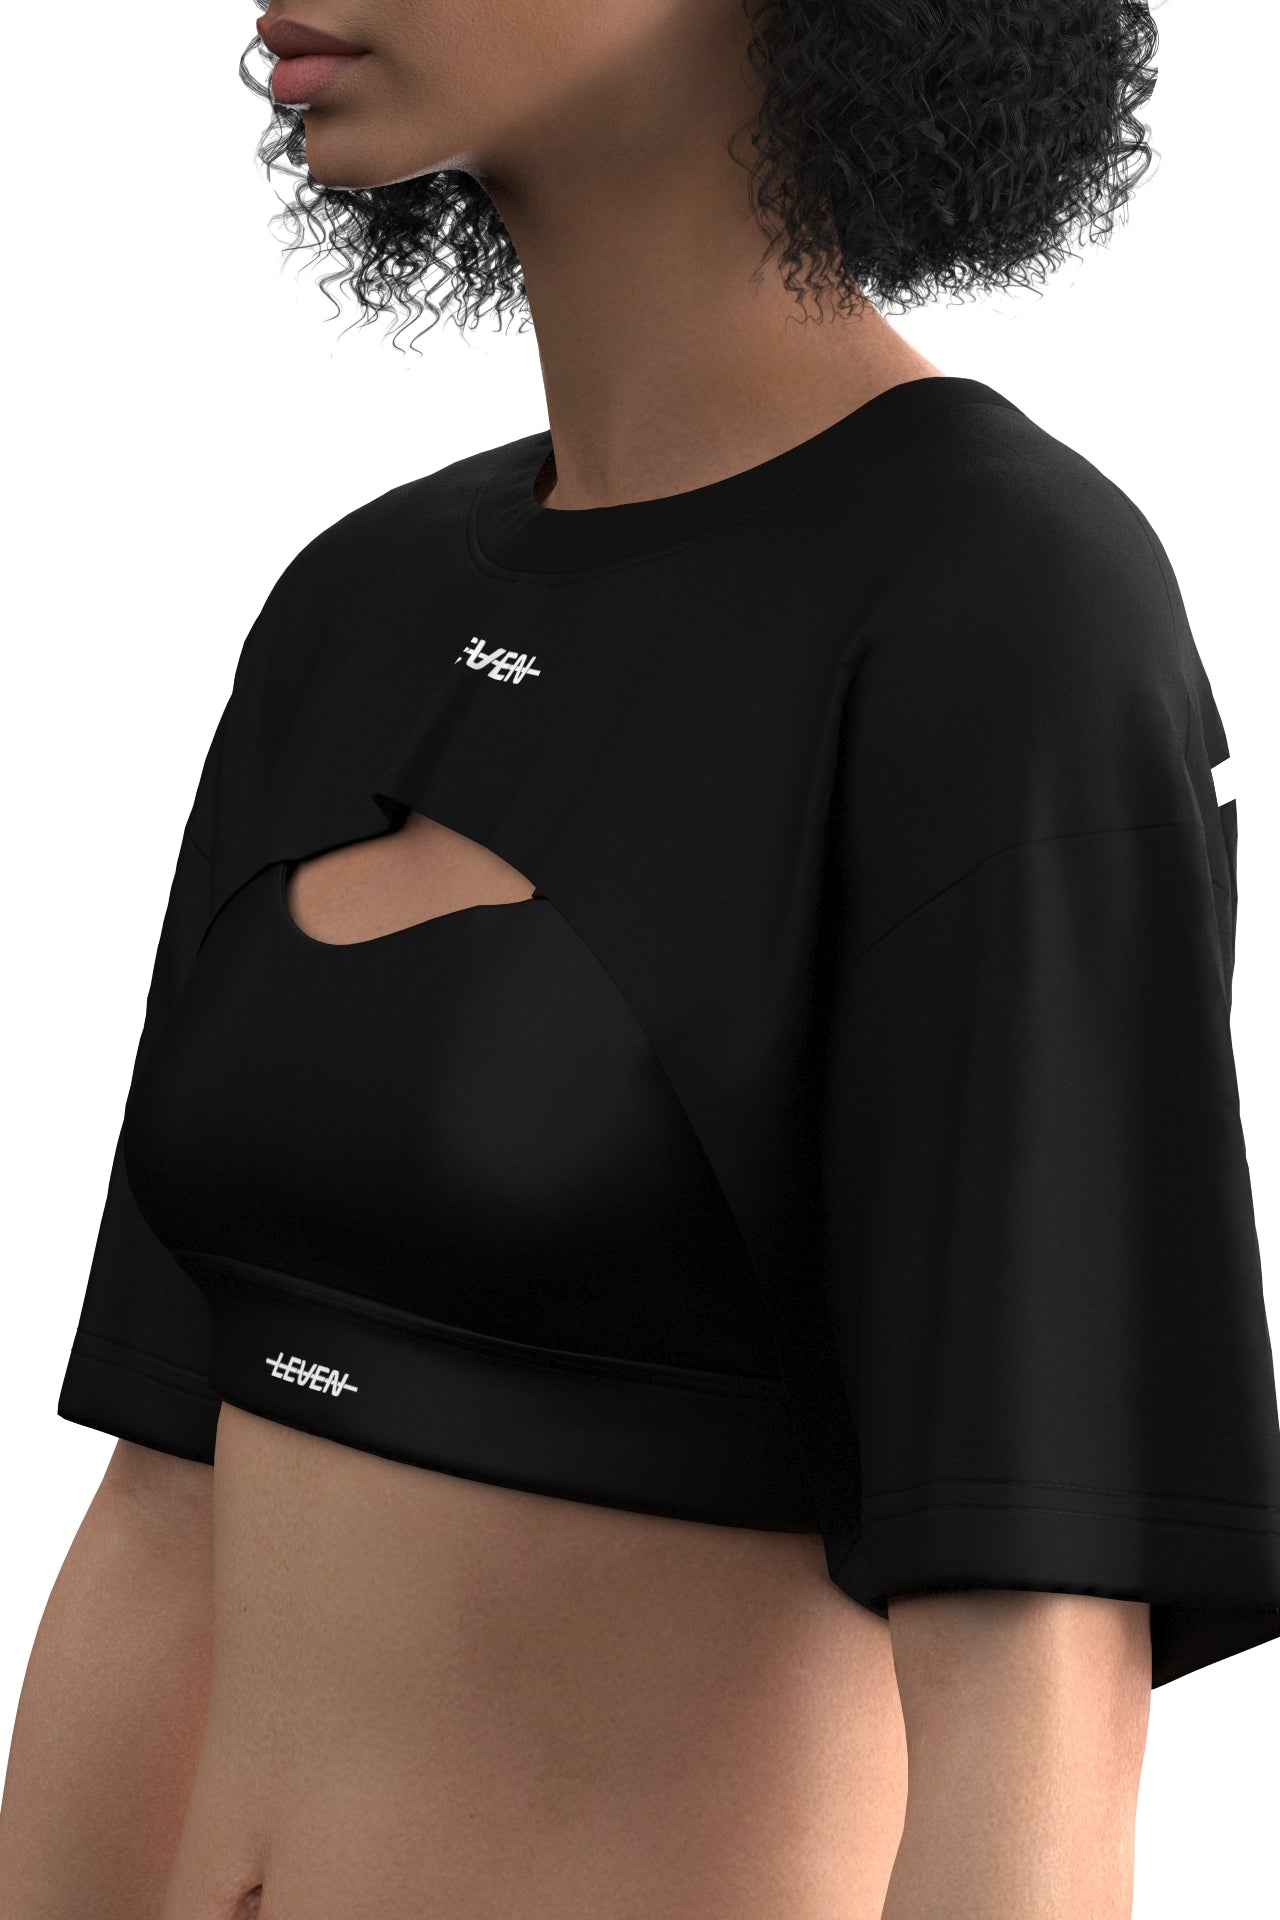 Leven's Ultra Cropped Crop Top Black